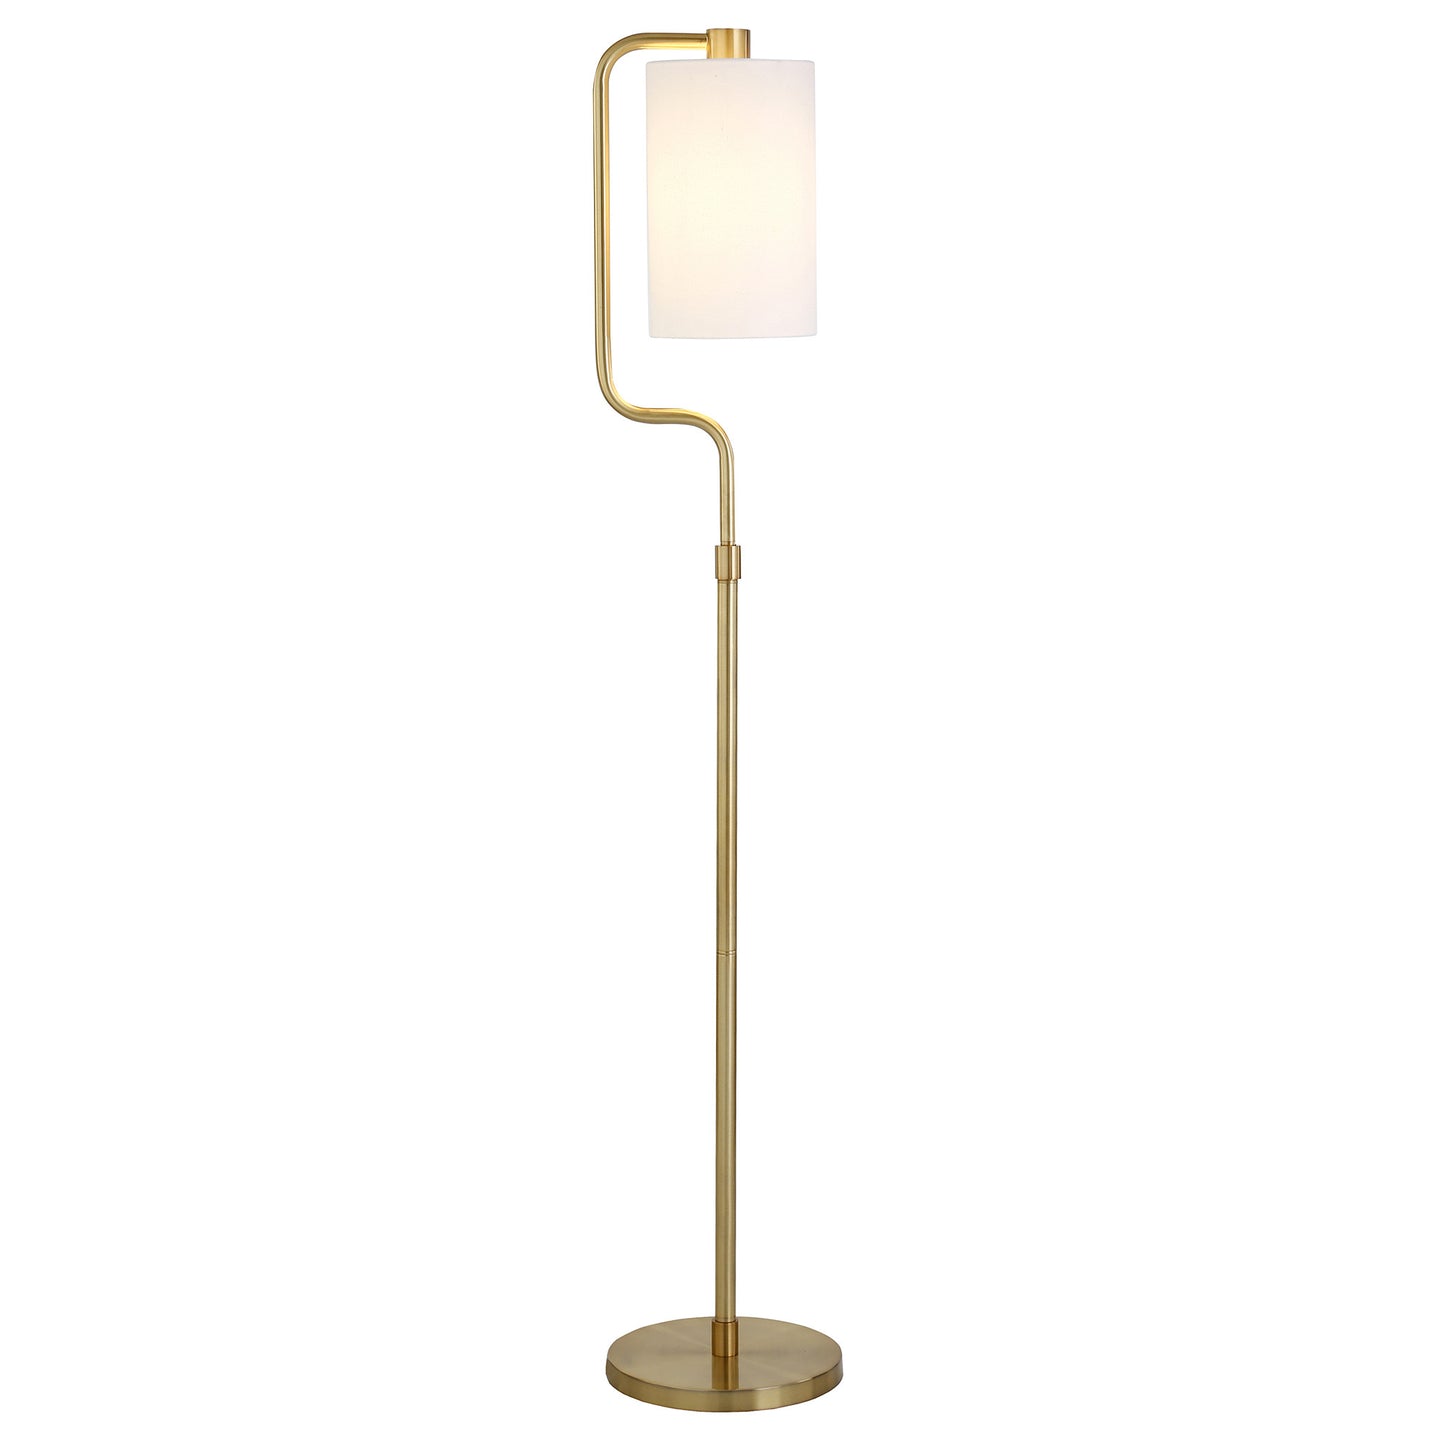 62" Brass Reading Floor Lamp With White Frosted Glass Drum Shade